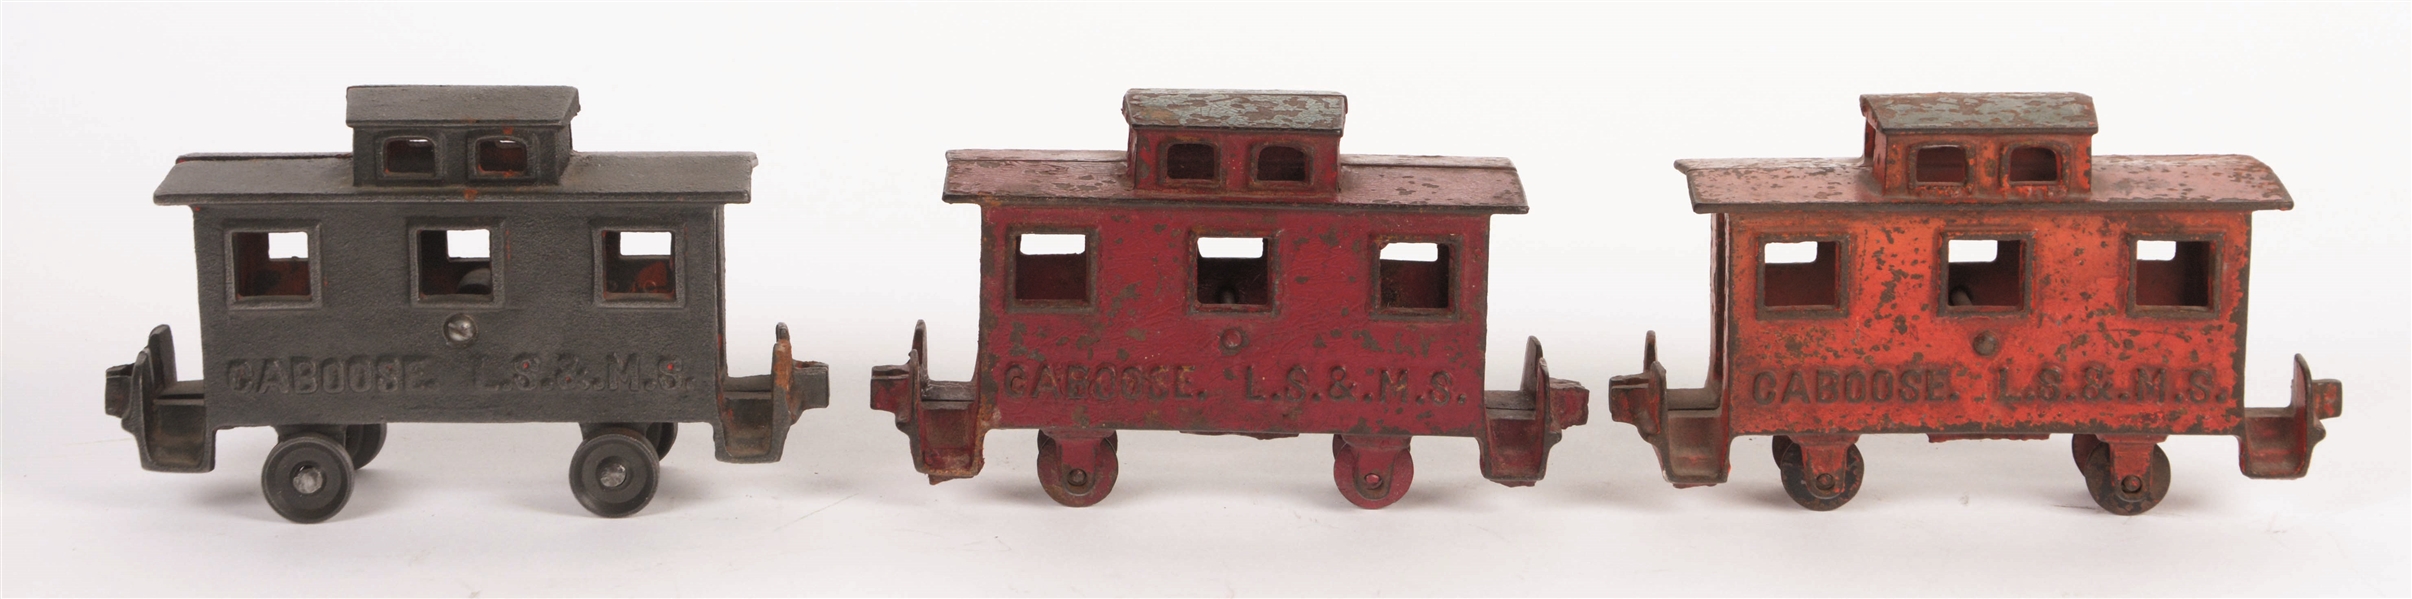 LOT OF 3: CAST-IRON FLOOR TOY CABOOSES BY KENTON.